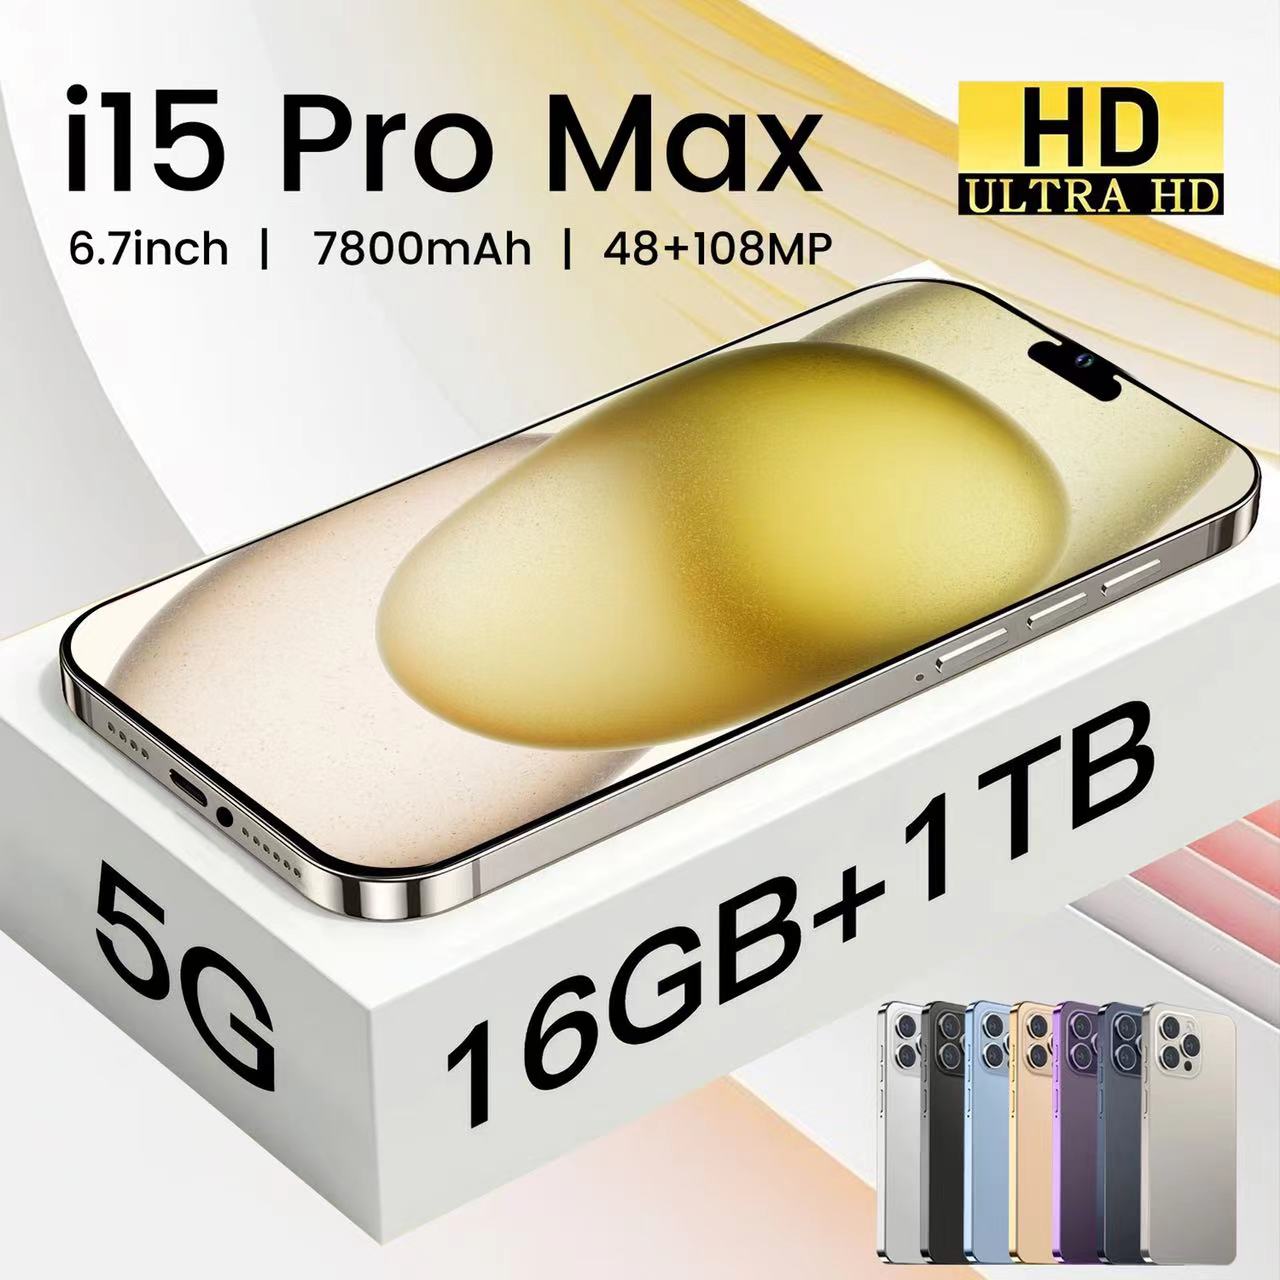 i15 pro max 5g telephone smartphone 6.7 inch smartphone 4G LTE smartphones 16GB RAM 1TB Camera 48MP 108MP Face ID GPS Octa Core android mobile phone